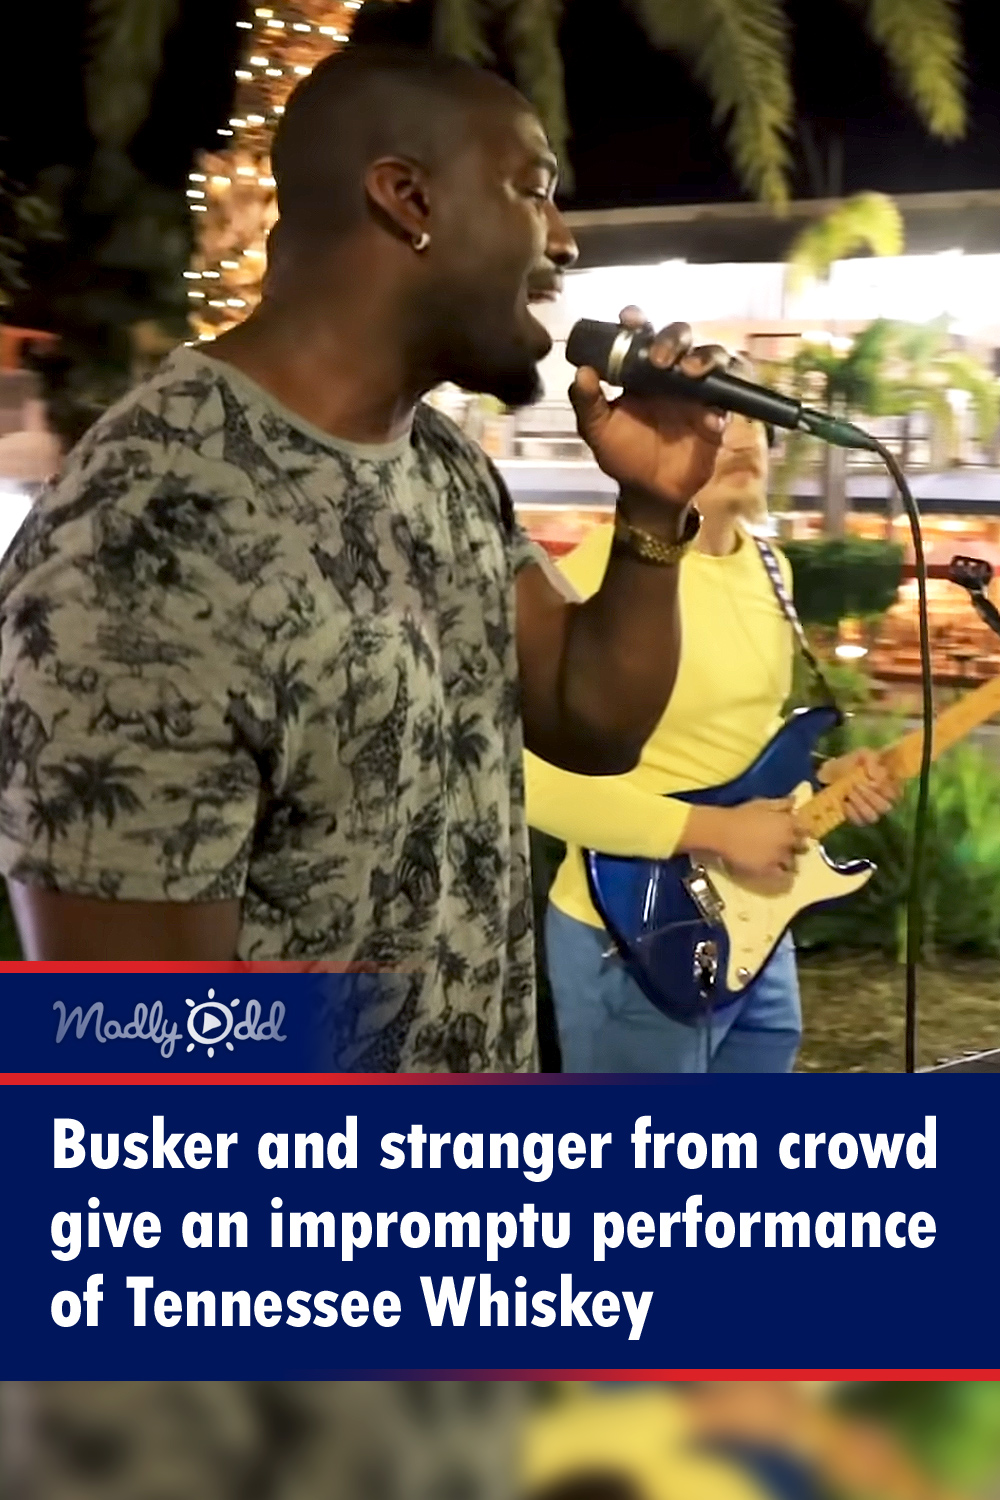 Busker and stranger from crowd give an impromptu performance of Tennessee Whiskey